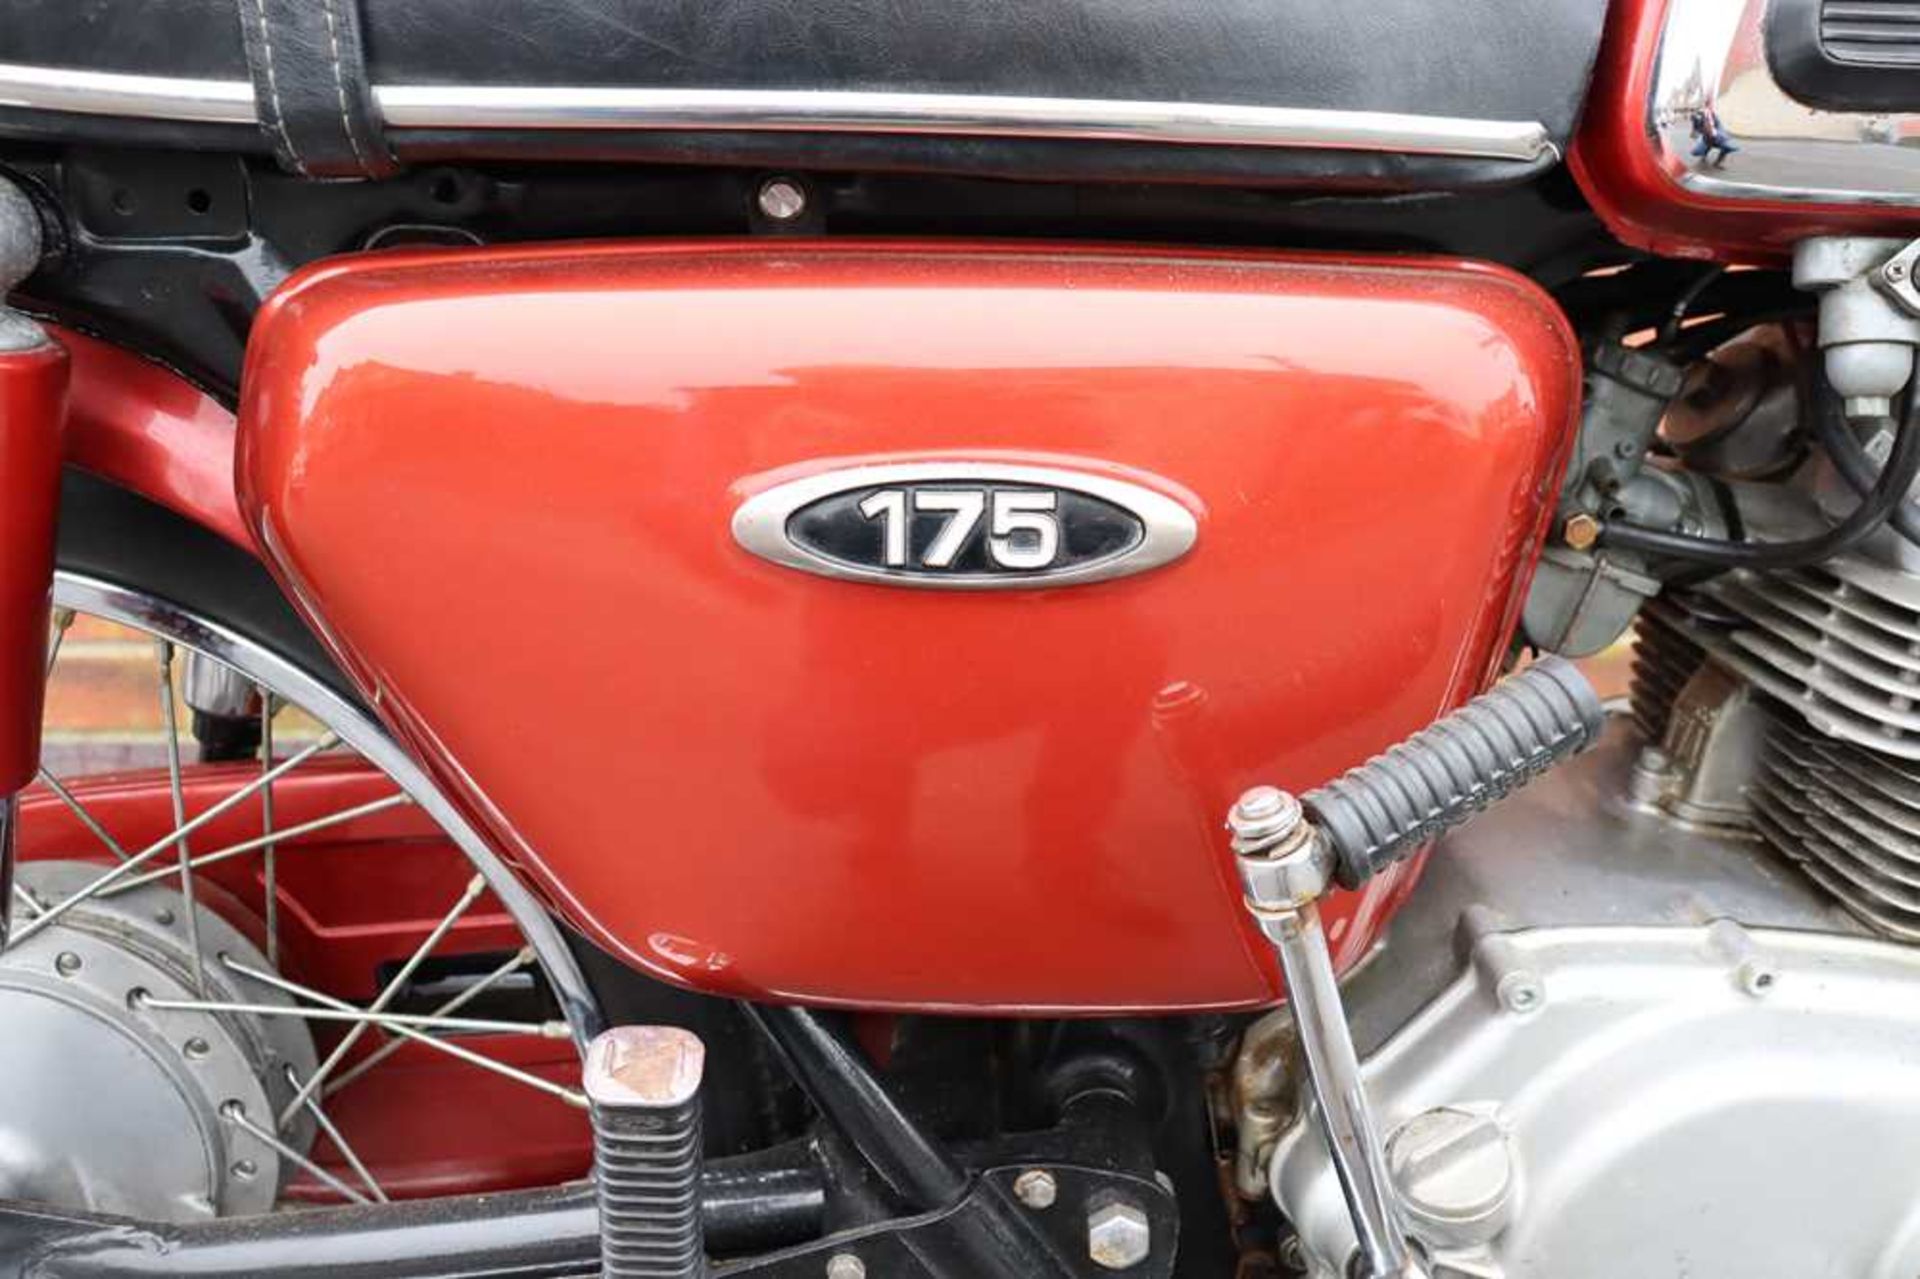 1972 Honda CD175 Authentically restored 175 twin - Image 11 of 43